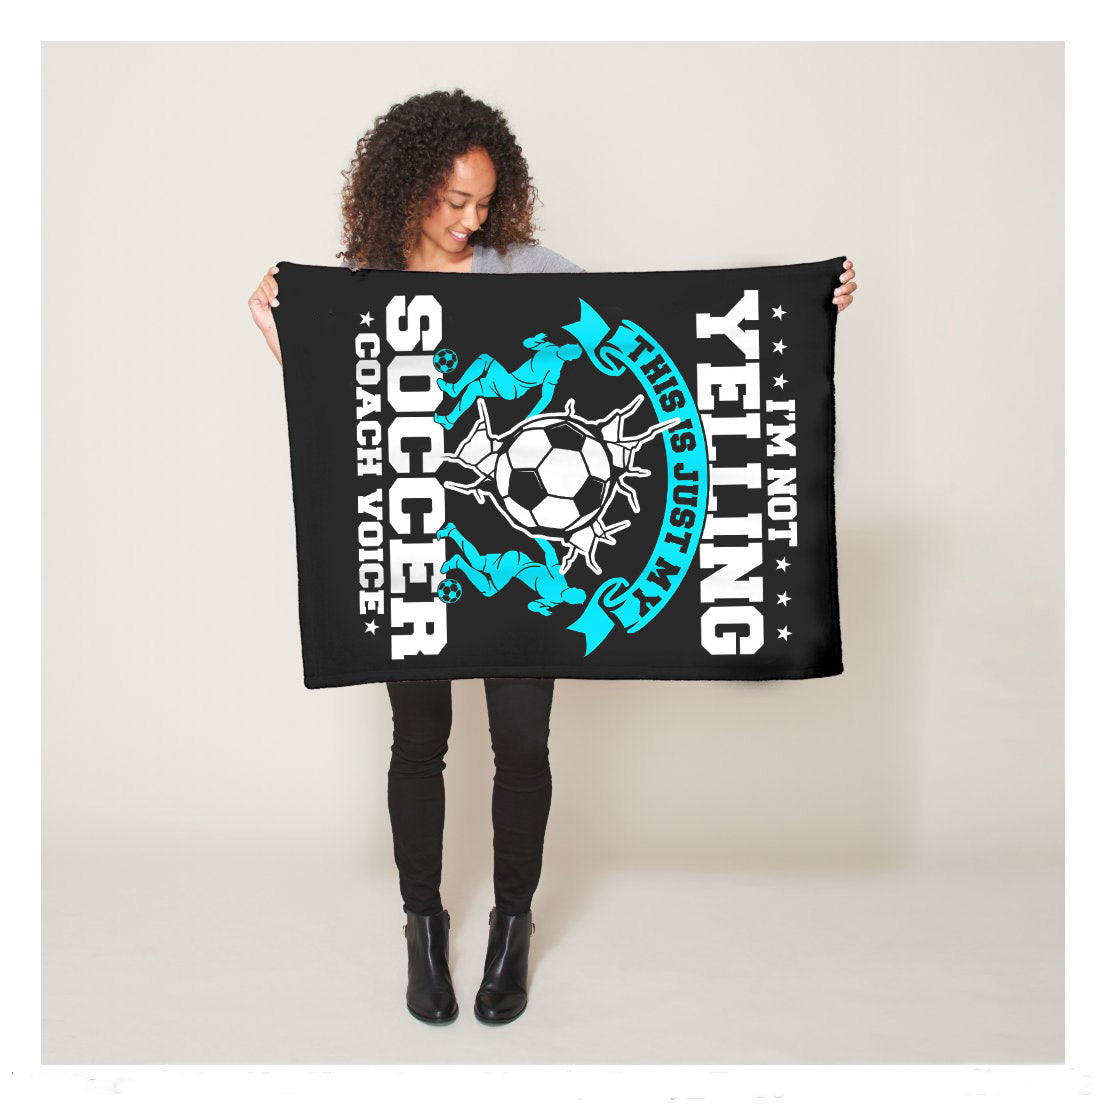 Im Not Yelling This Is Just My Soccer Coach Voice Funny Fleece Blanket  Soccer Outdoor Blankets, Soccer Gifts For Coach And Soccer Players, Birthday Gift For Soccer Player